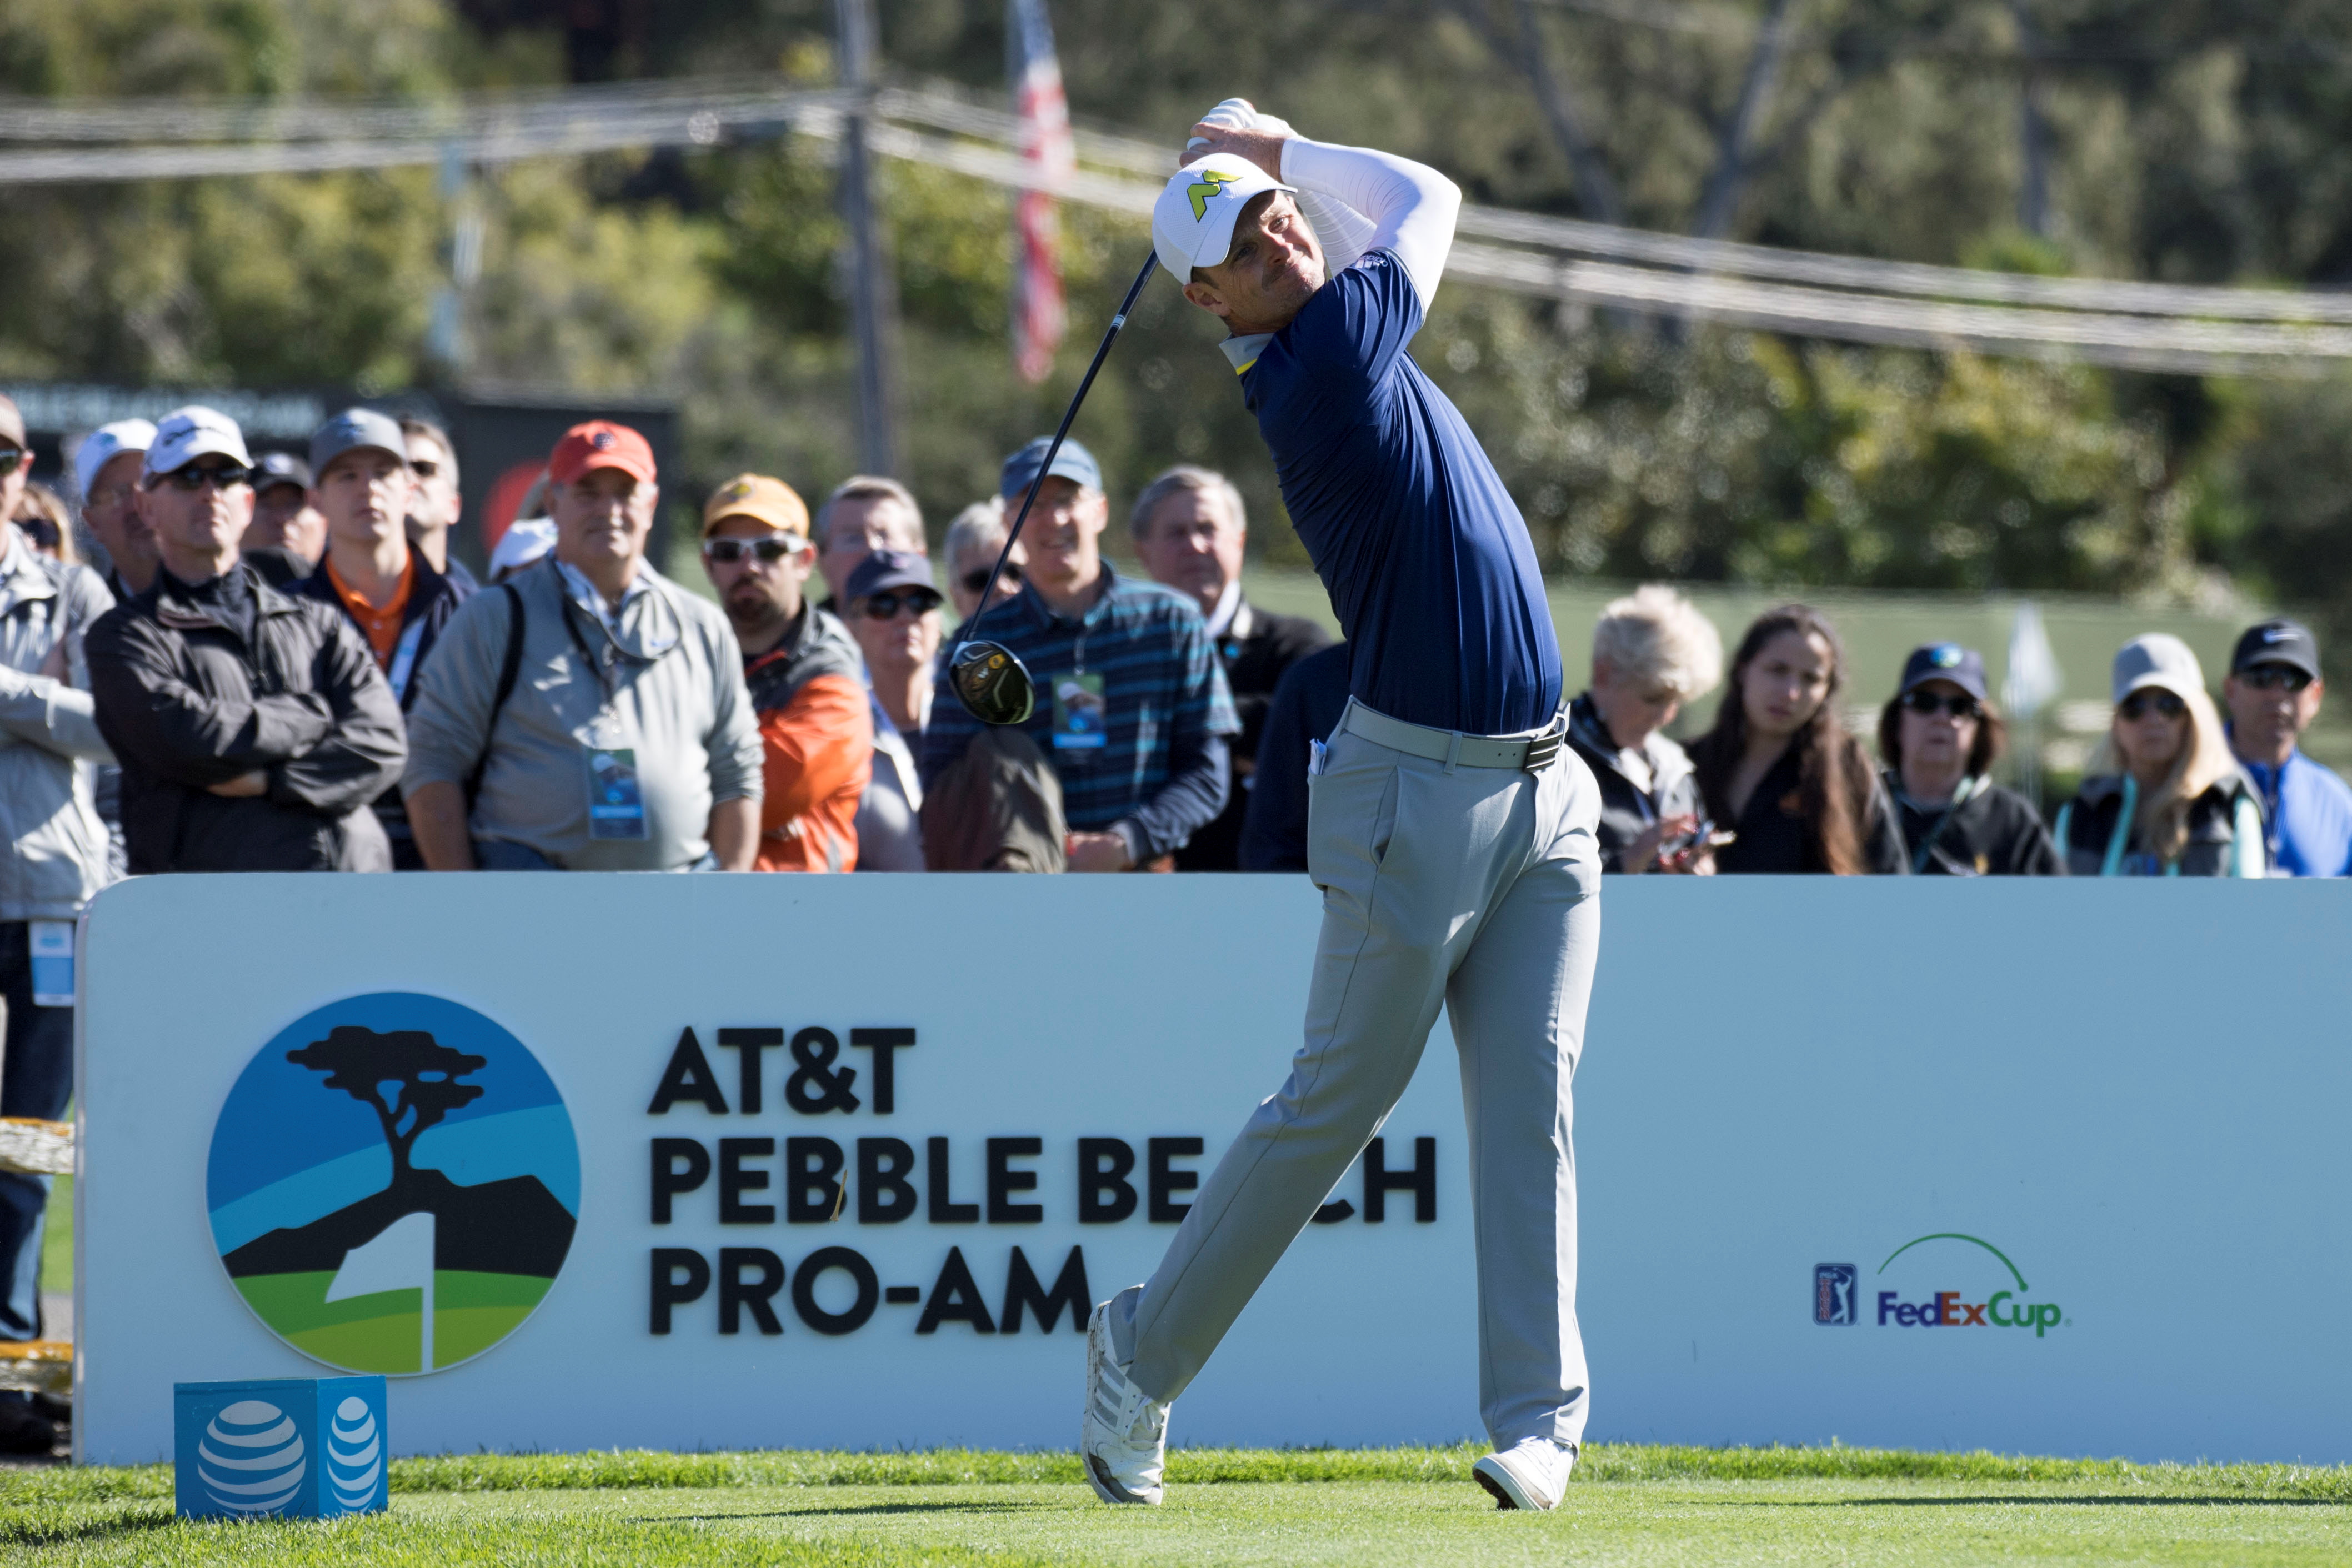 February 11, 2017; Pebble Beach, CA, USA; Justin Rose hits his tee shot on the third hole during the third round of the AT&T Pebble Beach Pro-Am golf tournament at Pebble Beach Golf Links. Mandatory Credit: Kyle Terada-USA TODAY Sports/File Photo